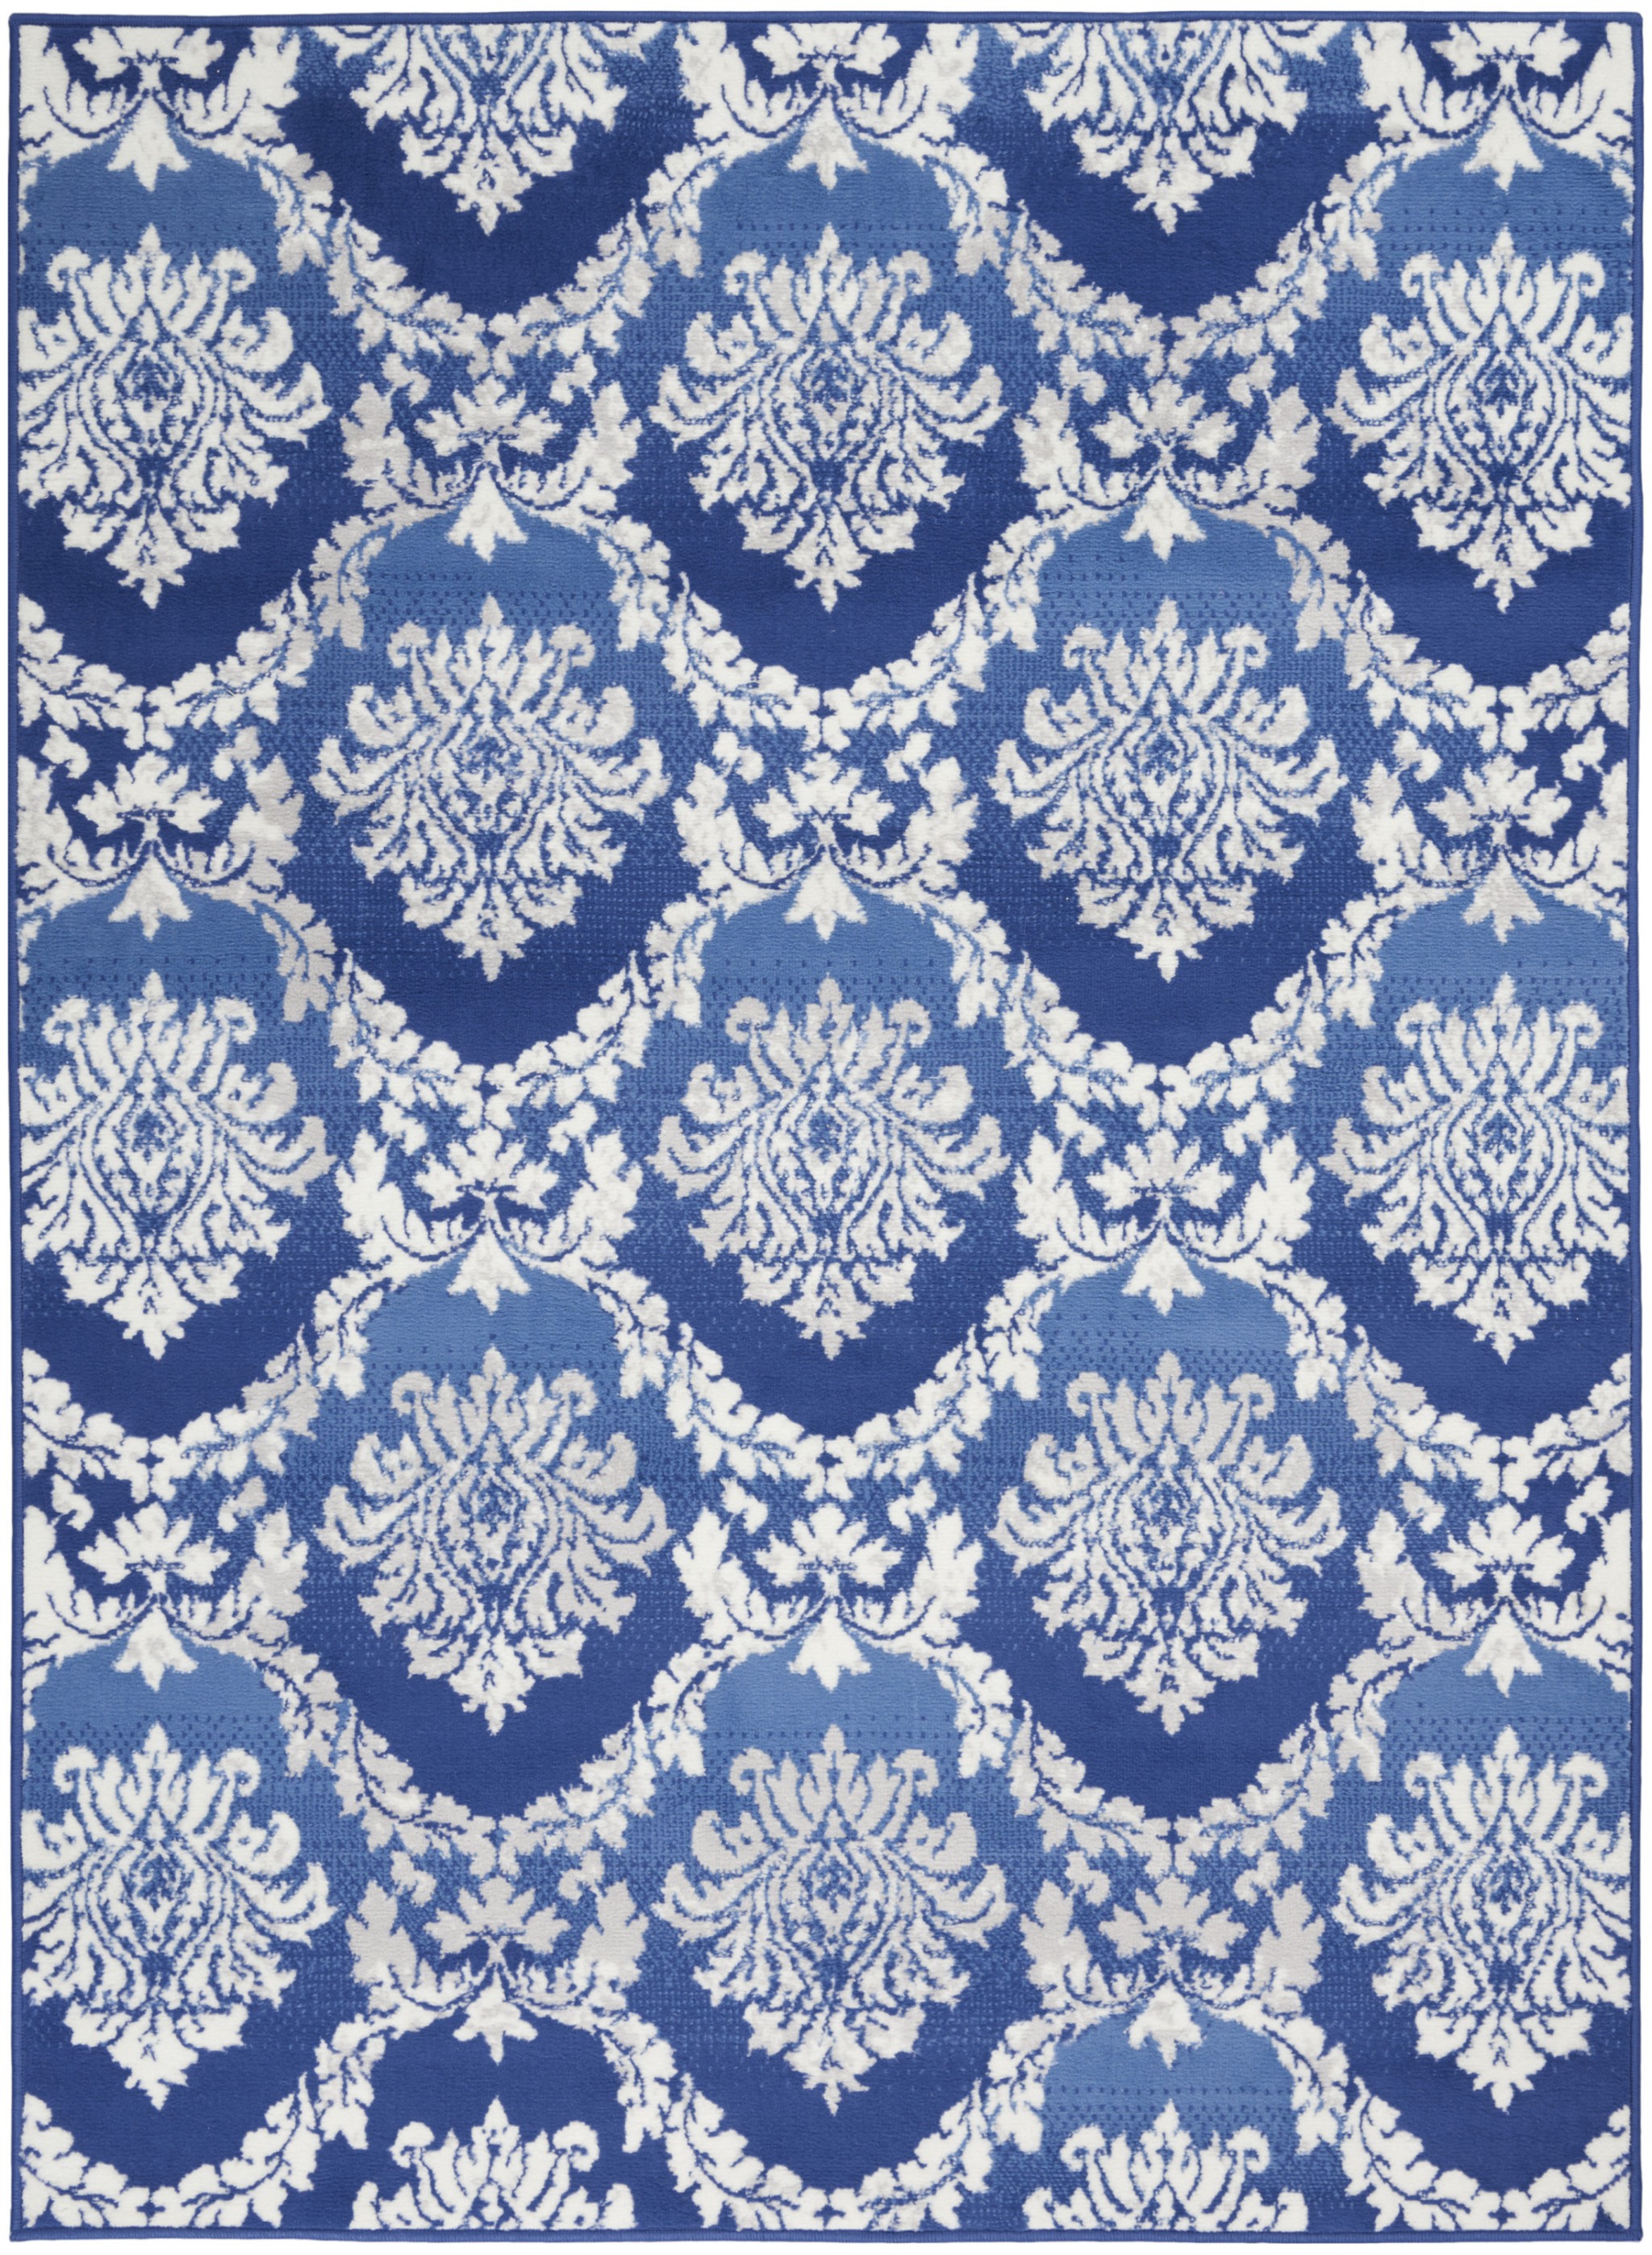 6' X 9' Blue Floral Dhurrie Area Rug-385821-1